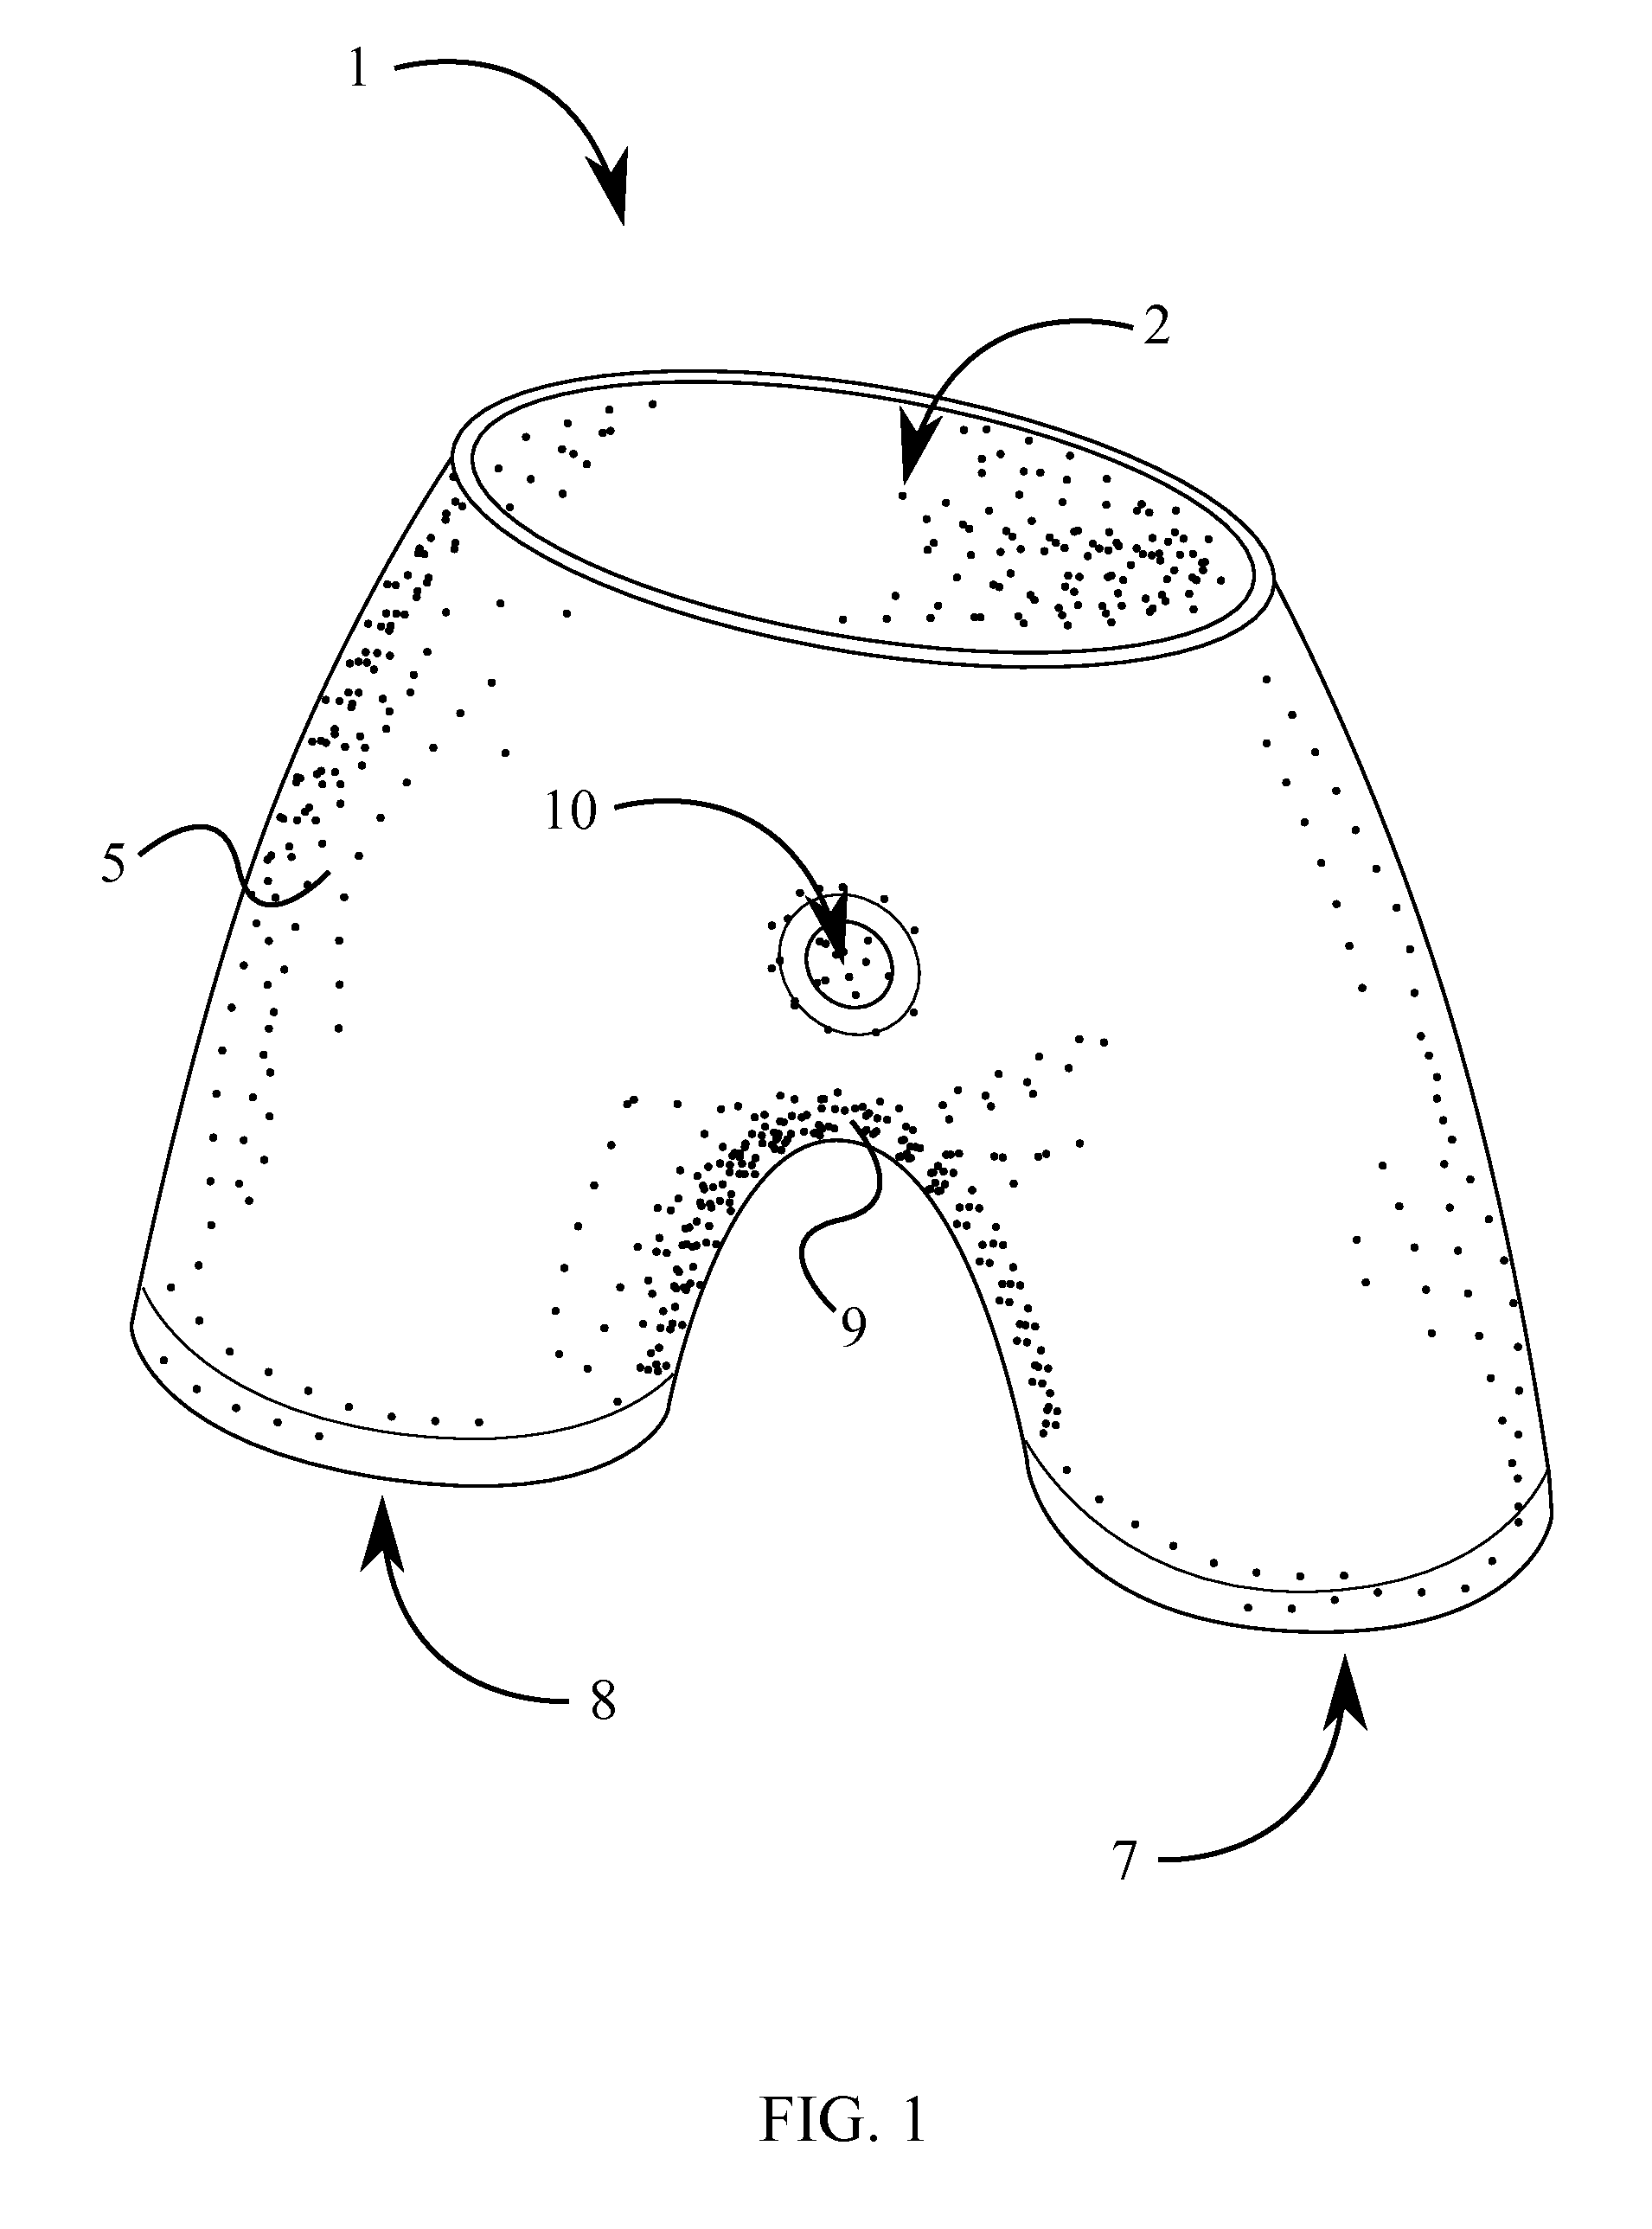 Barrier Device to Reduce Contact and Transmission of Pubic, Upper Thigh, and Buttocks Mediated Sexually Transmitted Diseases